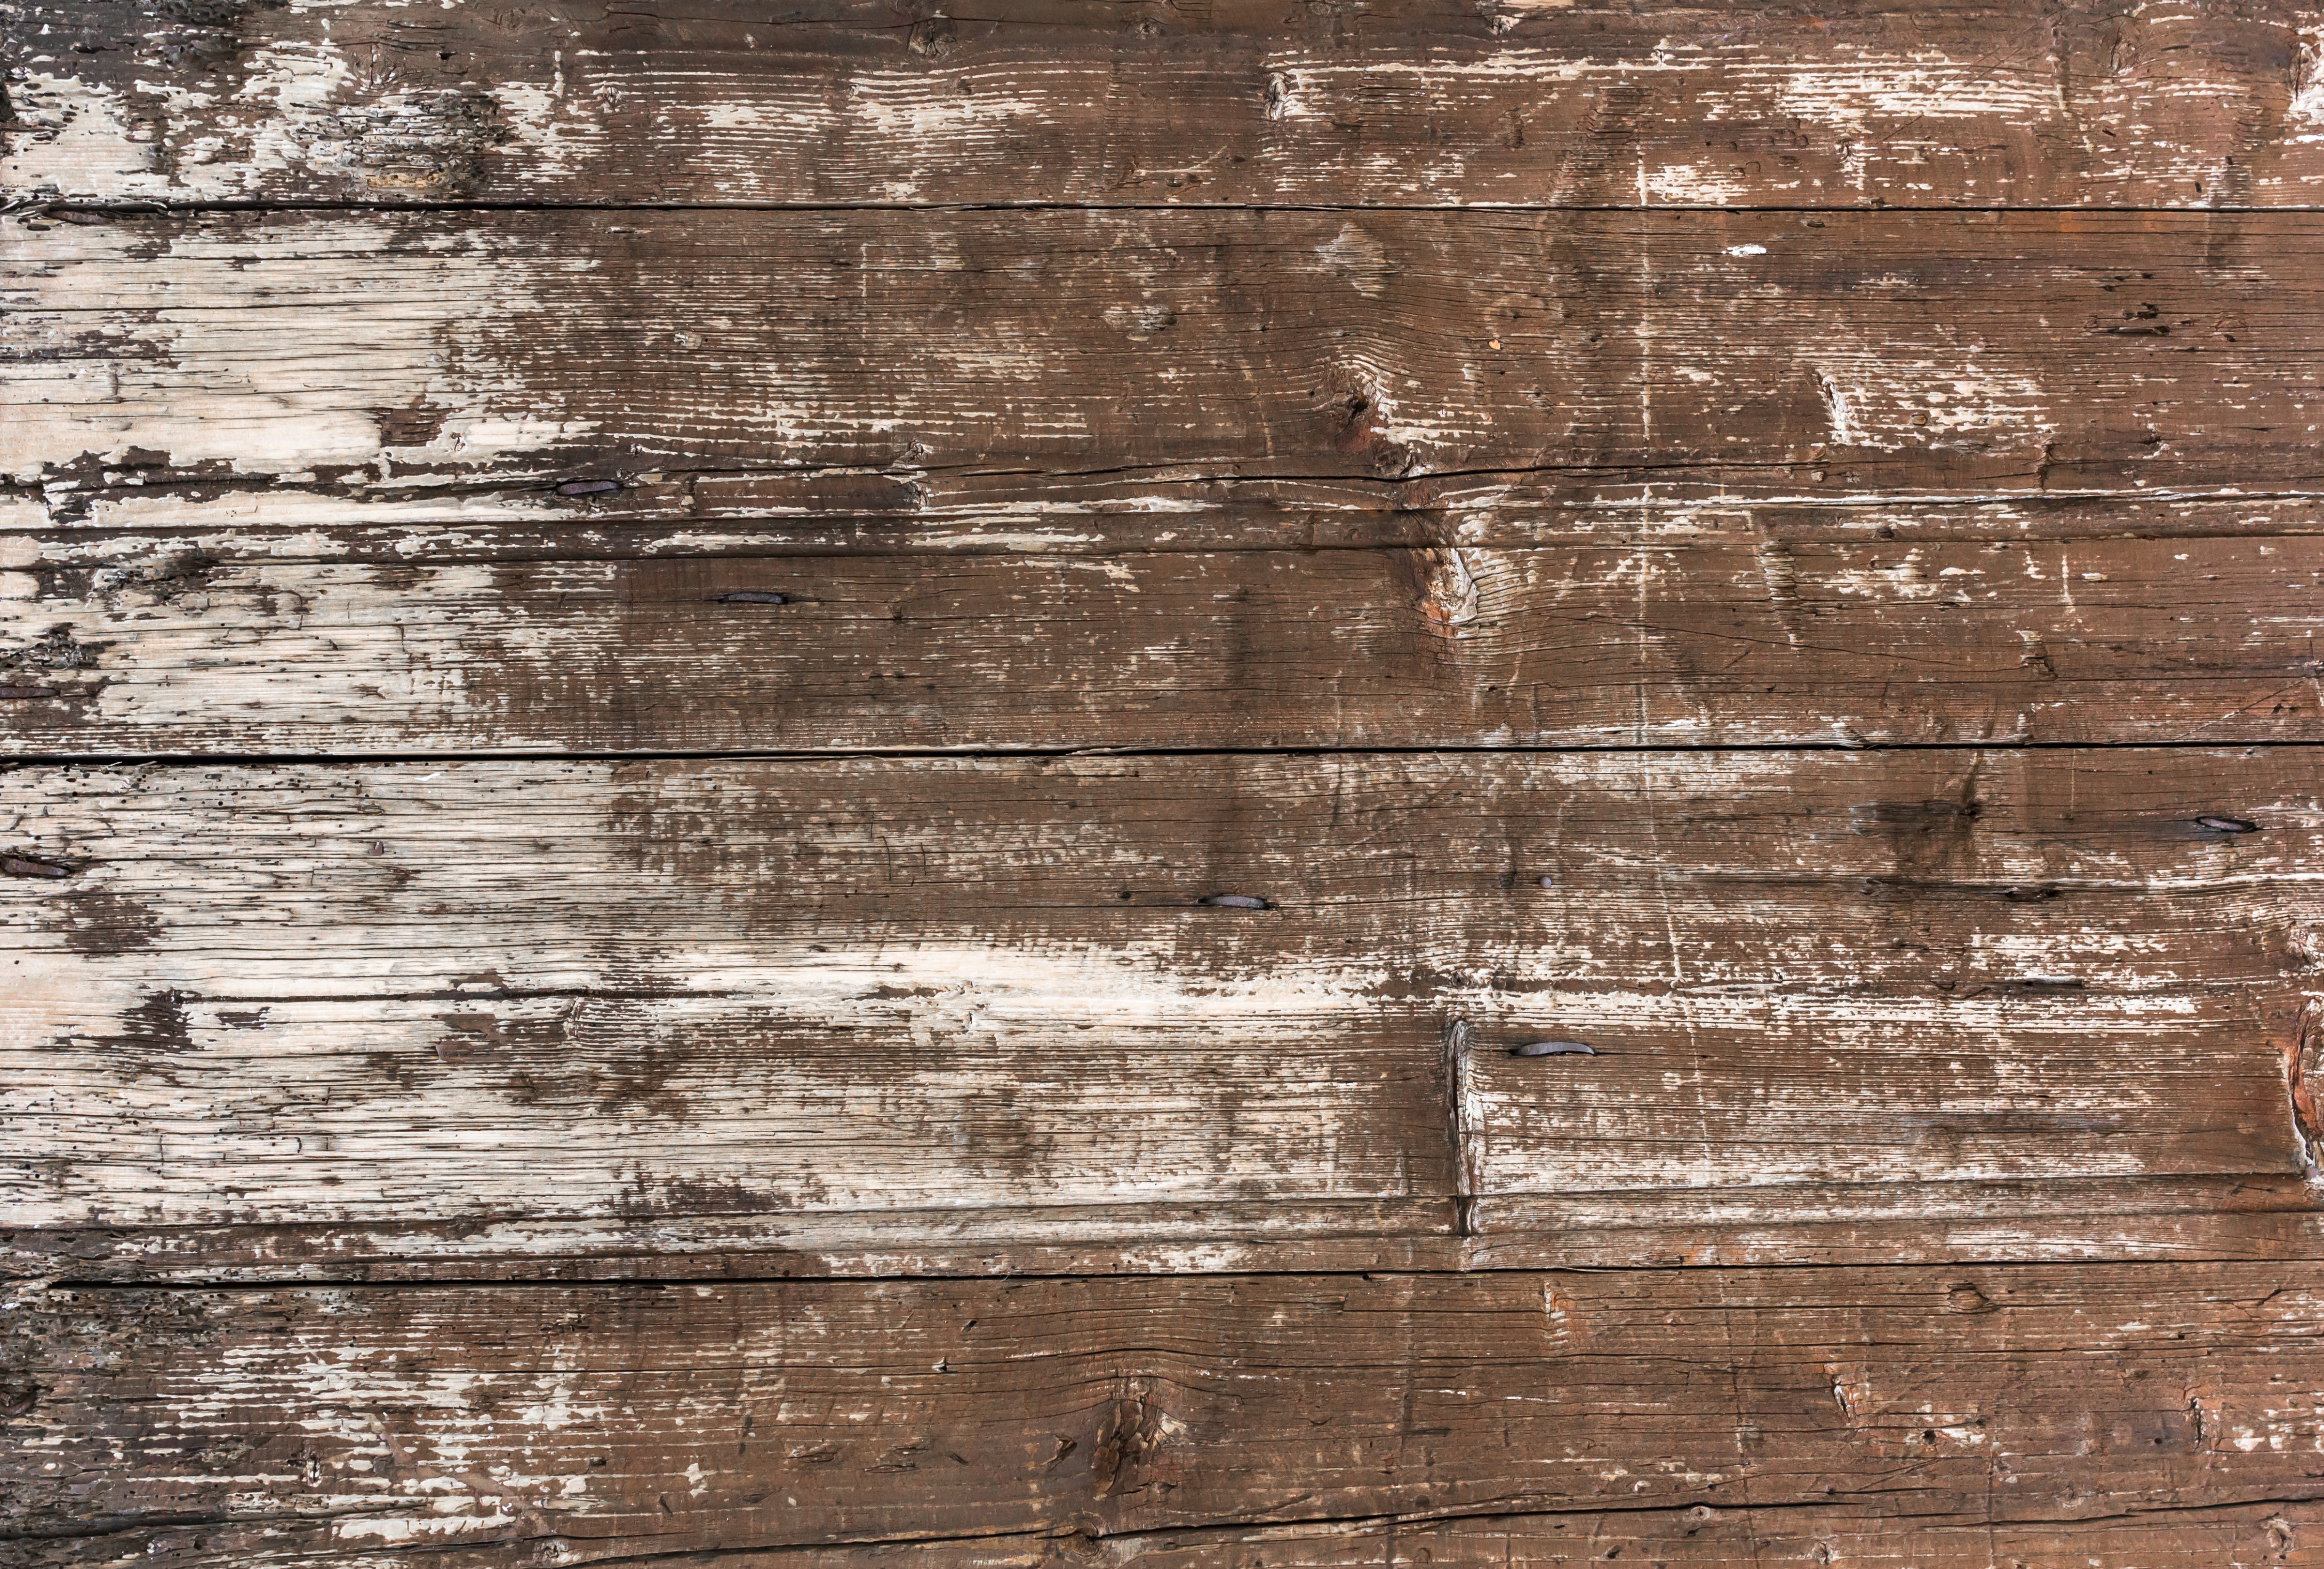 Does Stained Wood Have To Be ped Before Painting? | Home ..